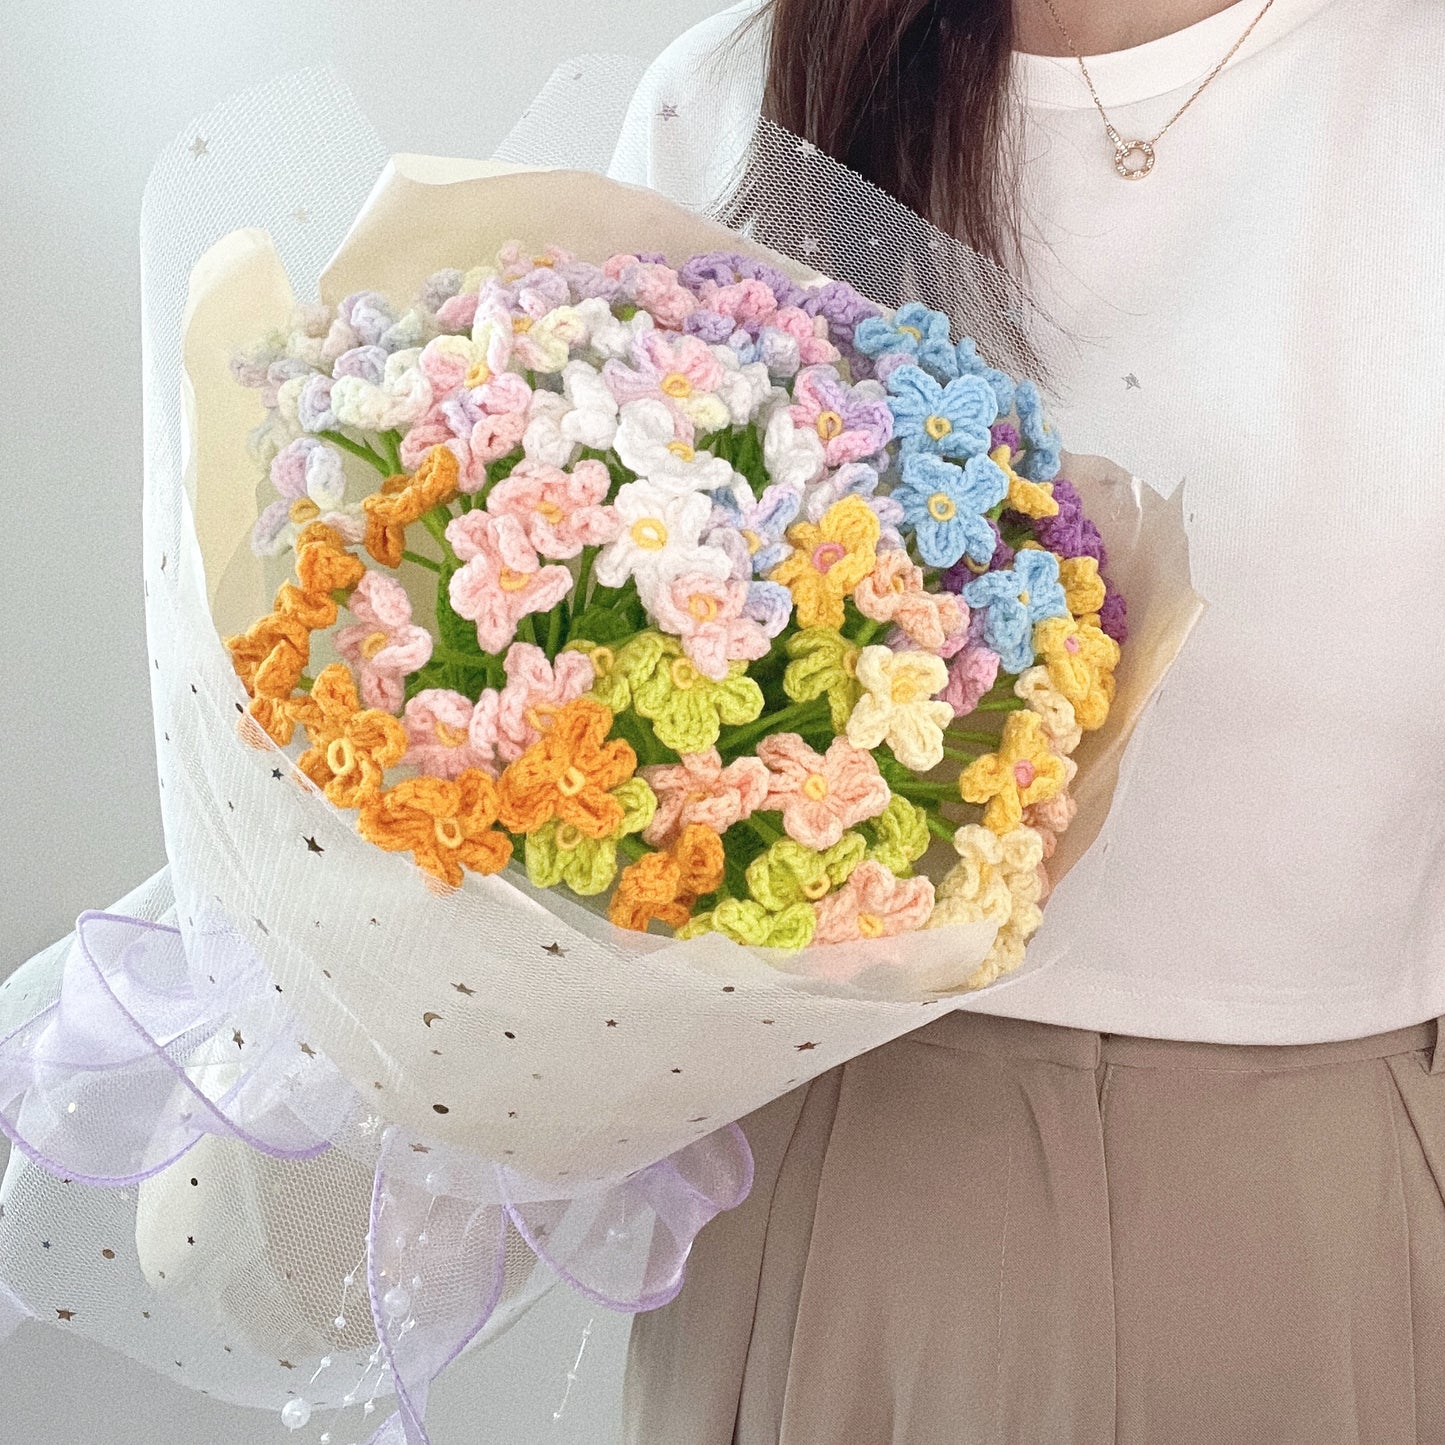 forever in bloom - forget me not crochet flower bouquet ✧˚ ༘ ⋆｡🌸˚